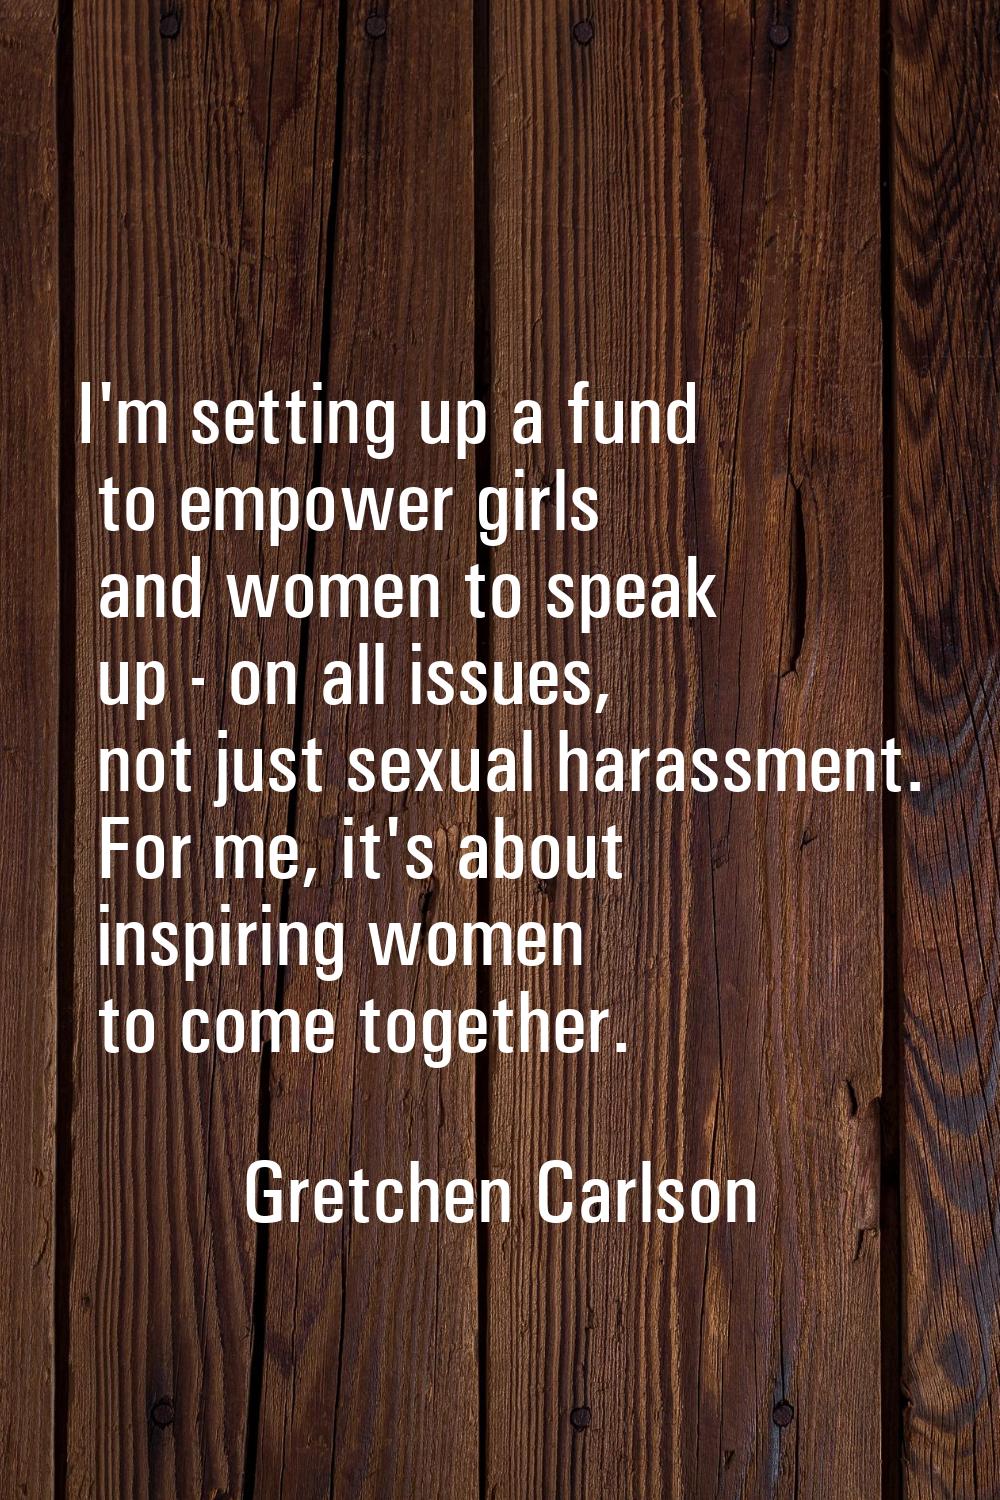 I'm setting up a fund to empower girls and women to speak up - on all issues, not just sexual haras